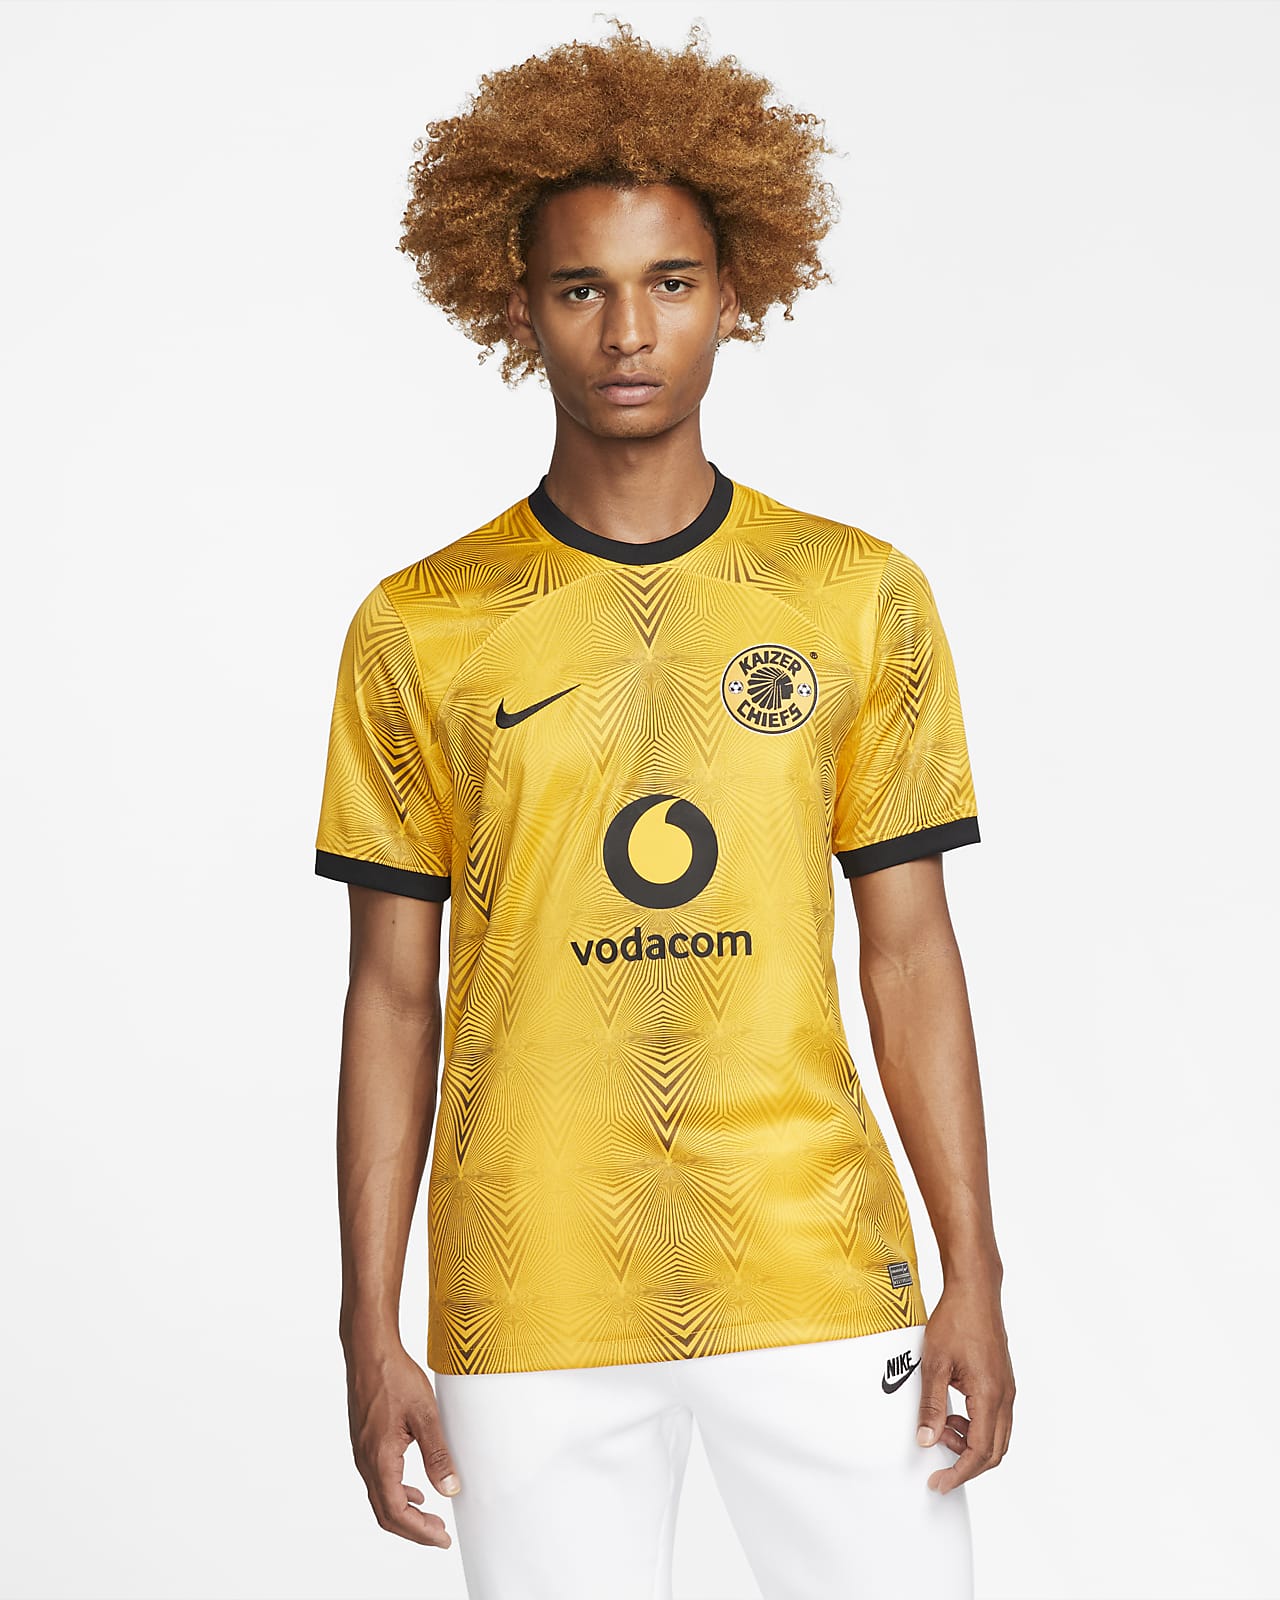 kaizer chiefs jersey price at total sport